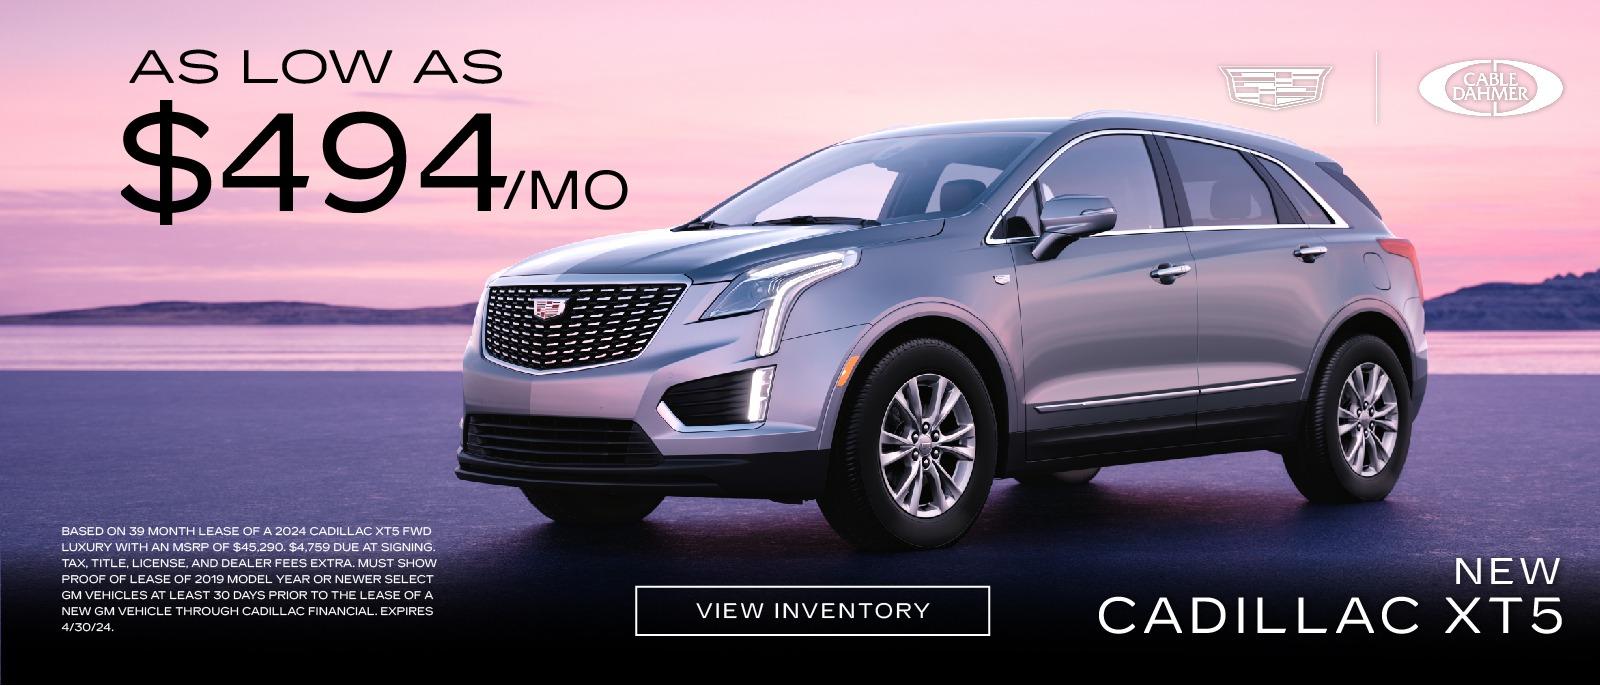 New Cadillac XT5 for as low as $494 a month.